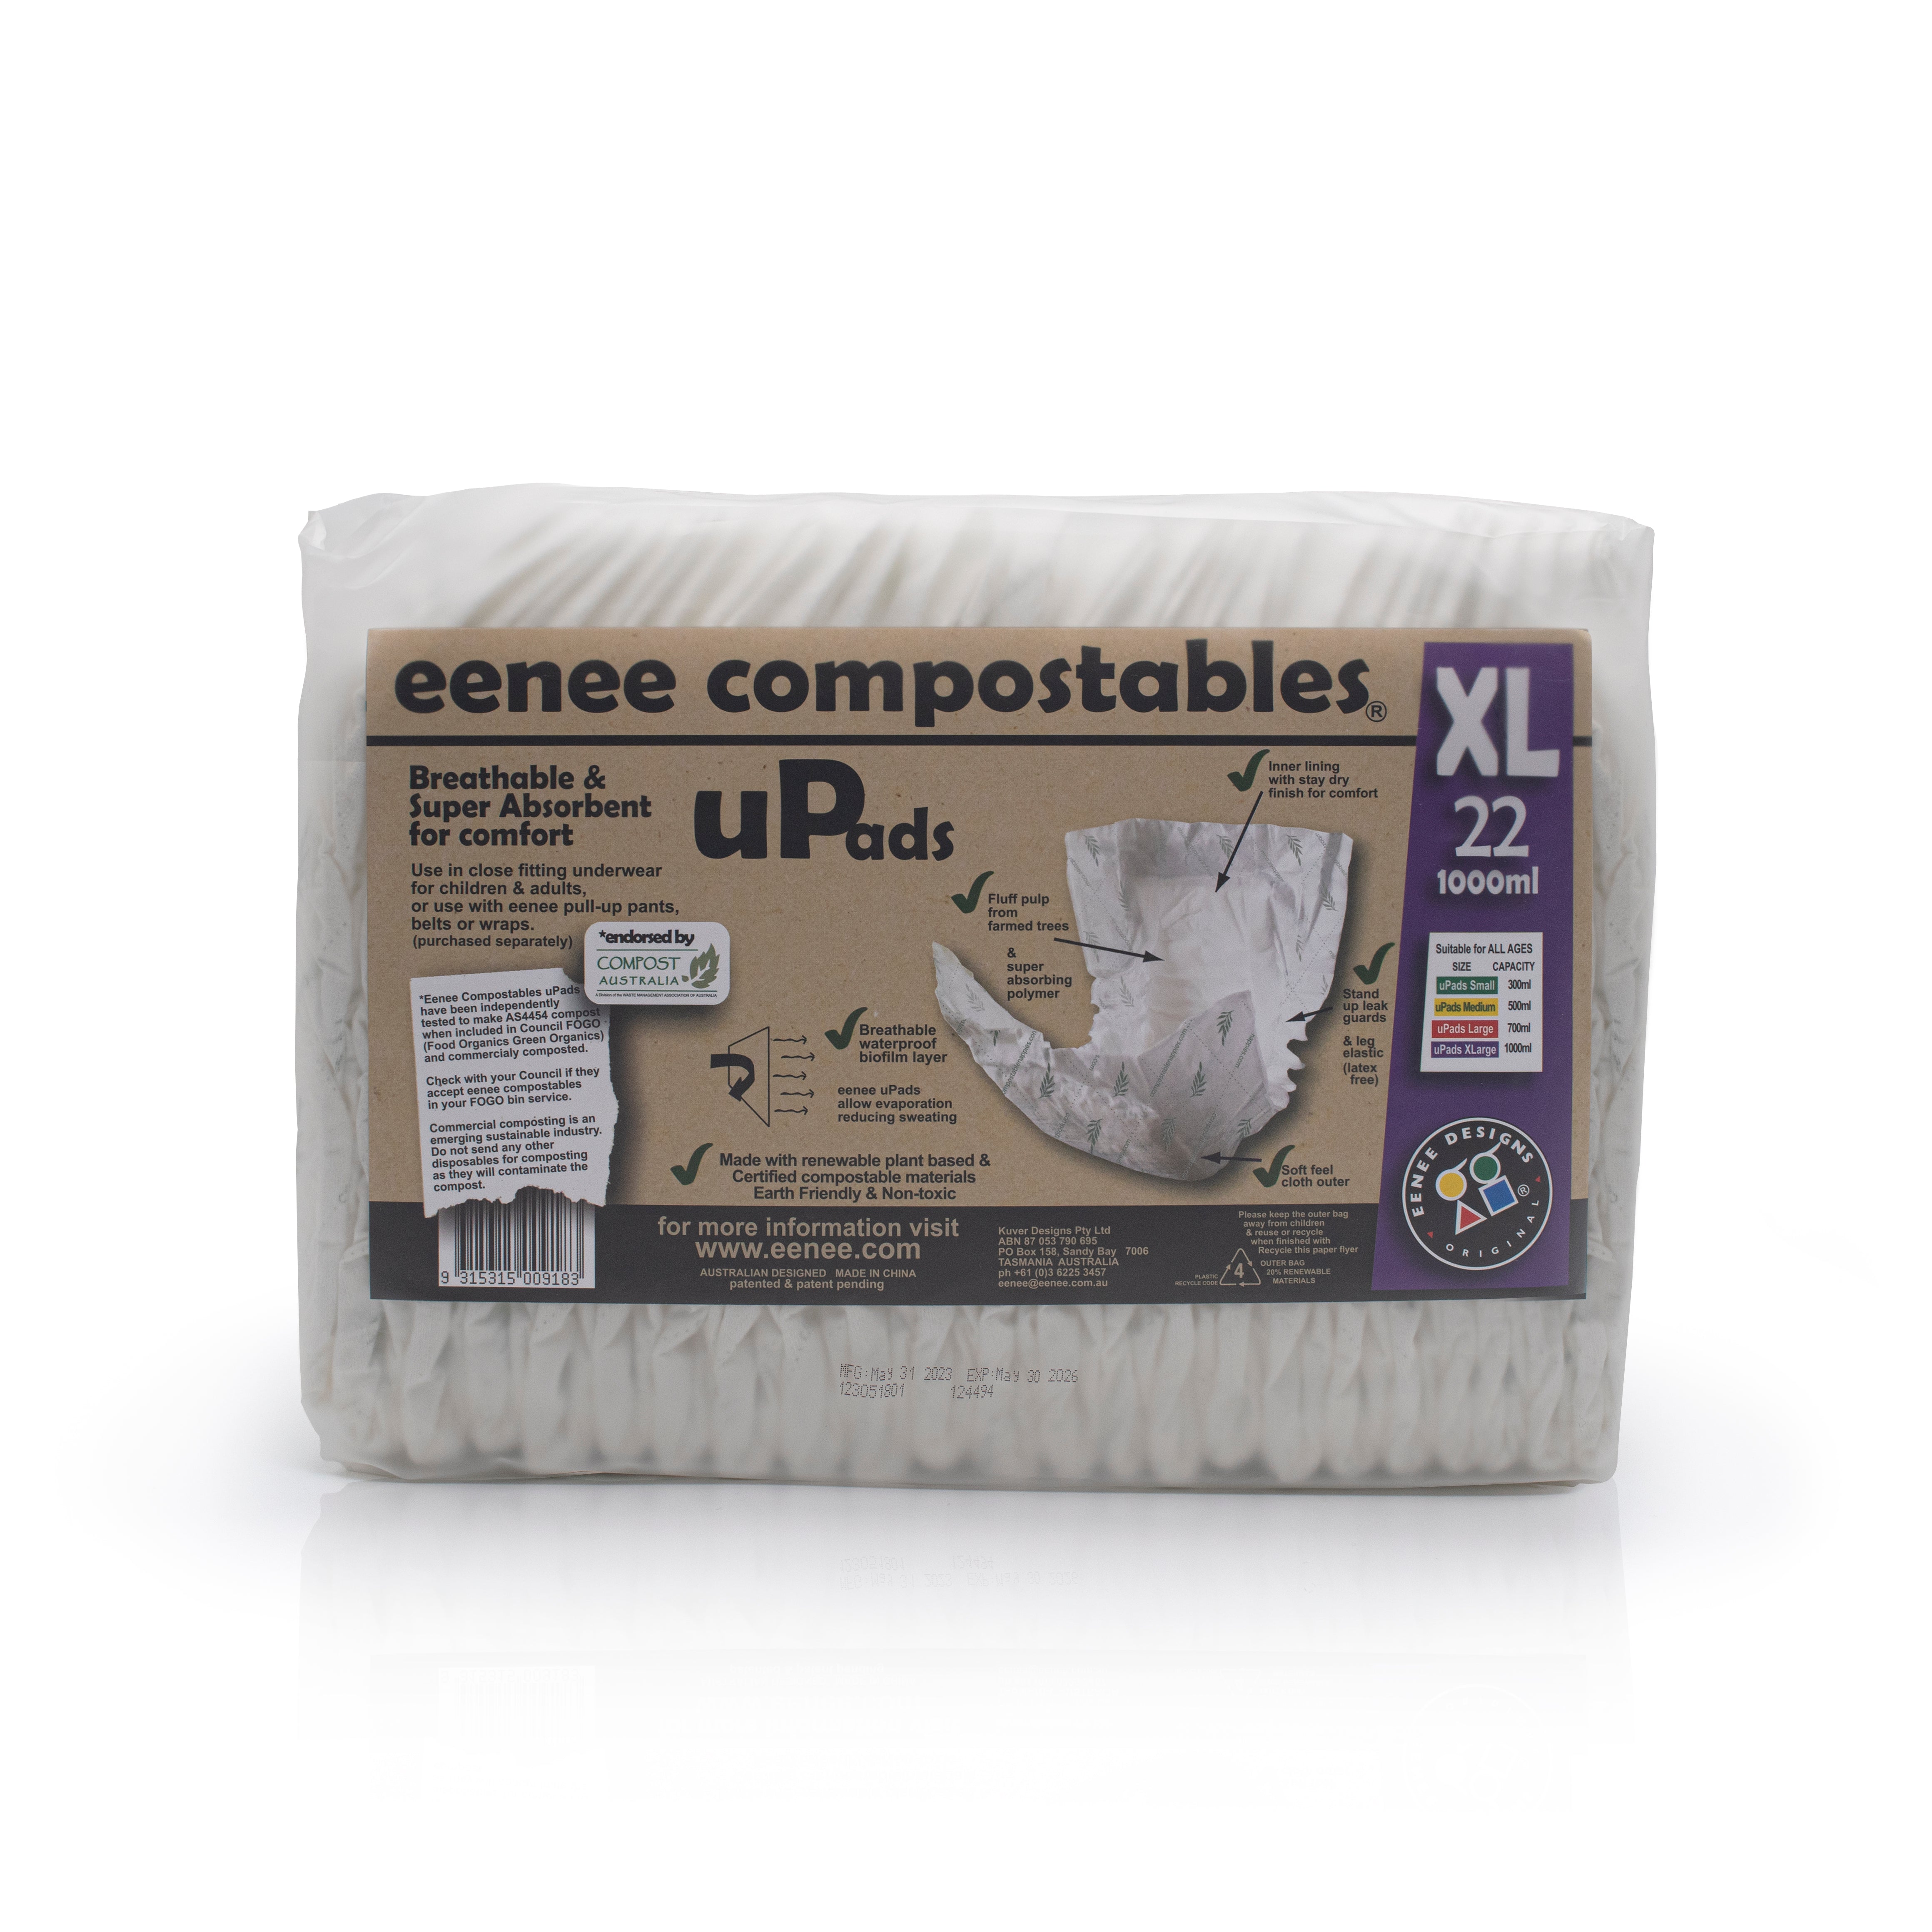 extra large eenee compostable nappy pads for children and toddlers